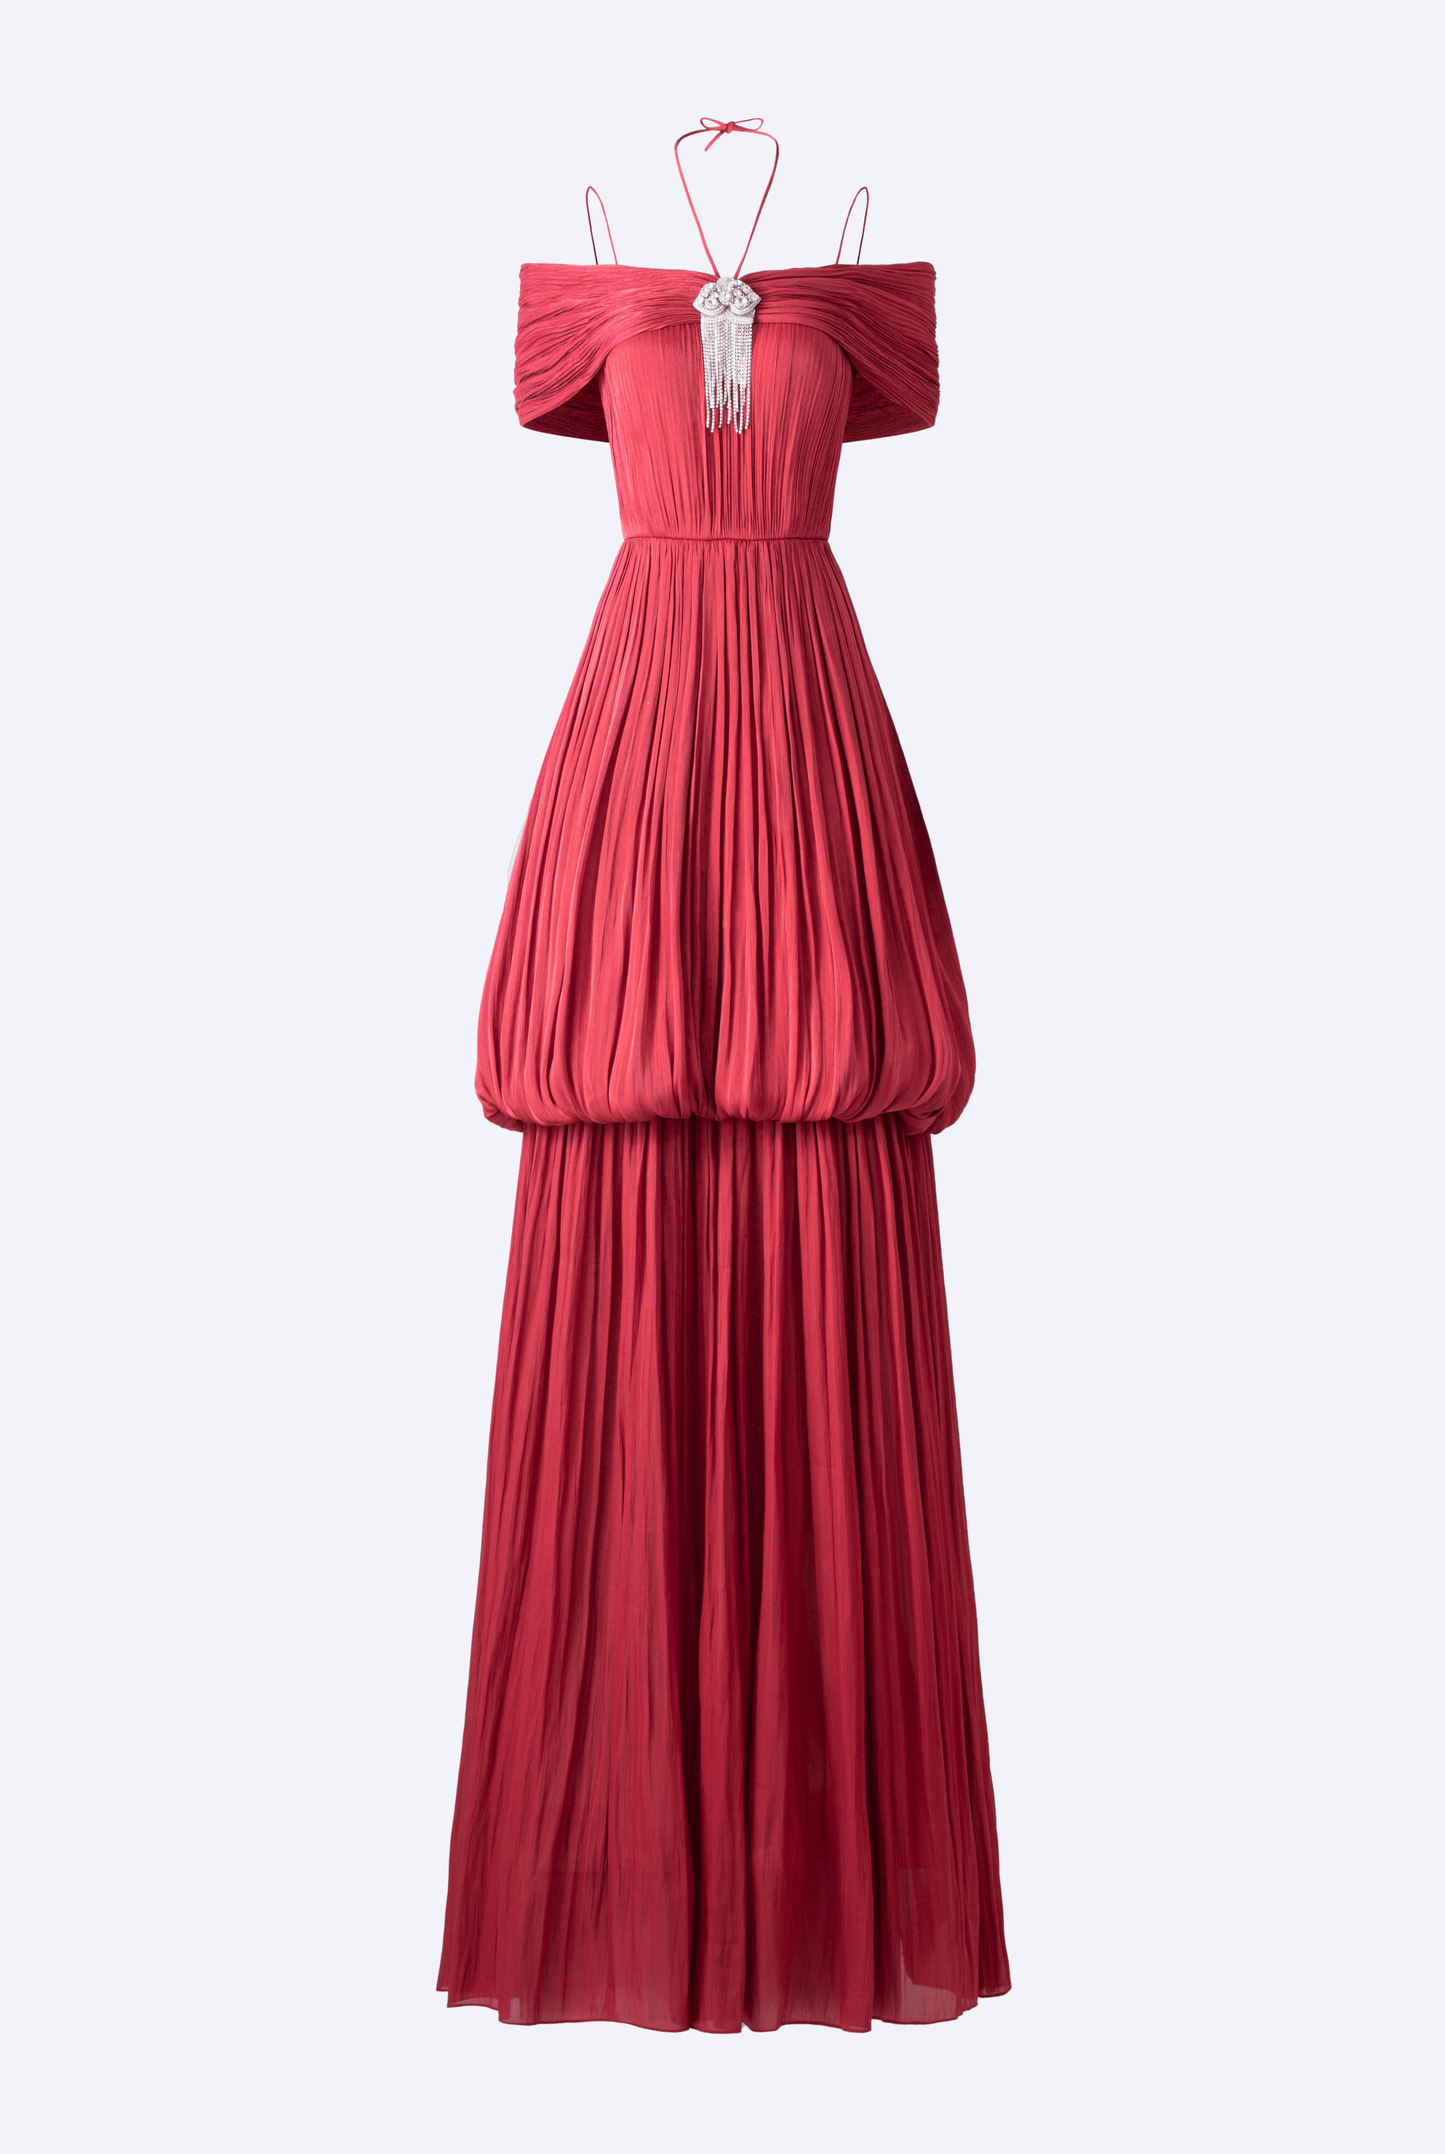 Off-Shoulder Bubble Flare Pleated Full Dress